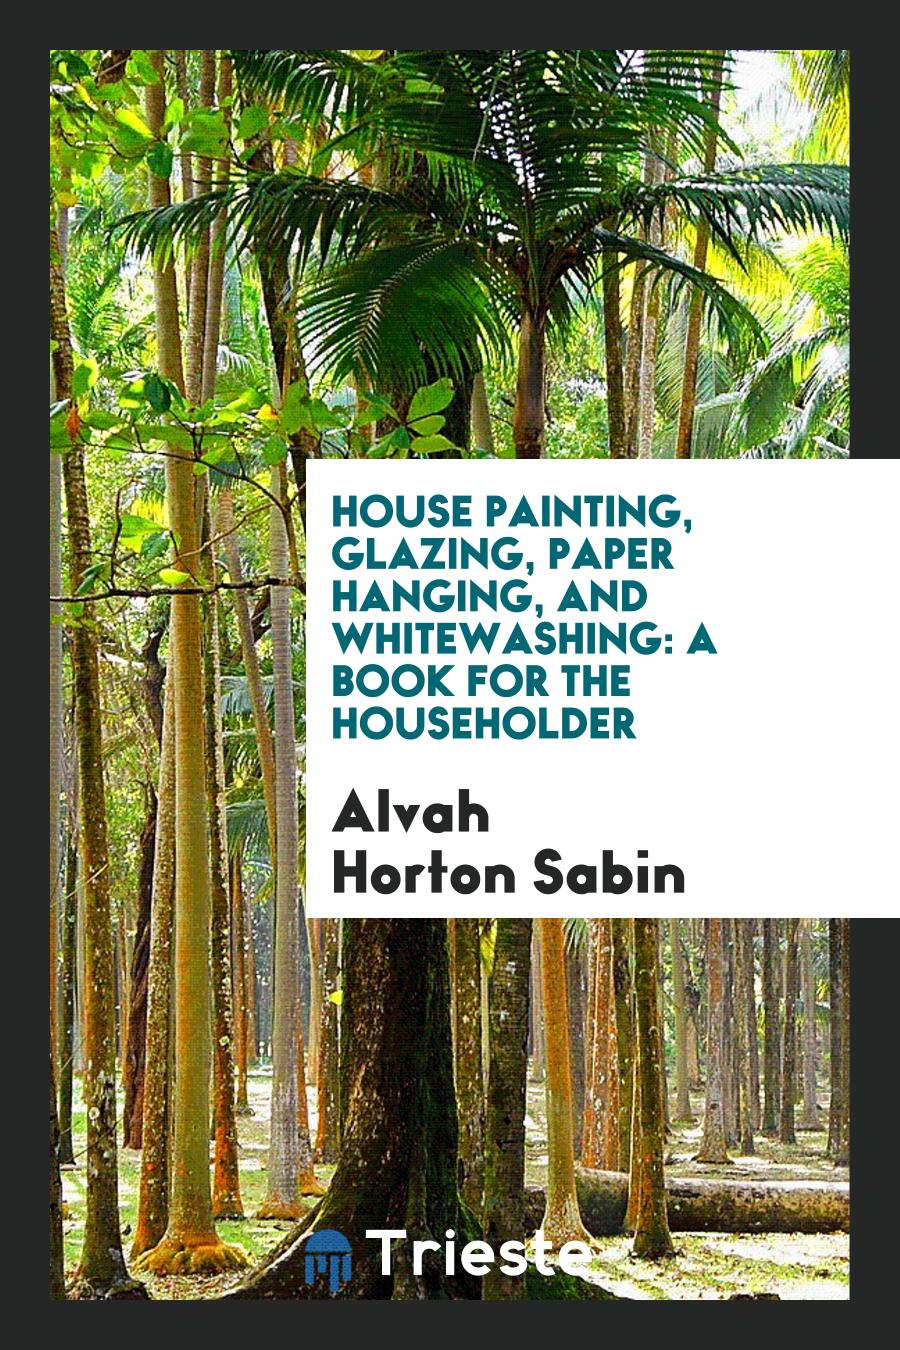 House Painting, Glazing, Paper Hanging, and Whitewashing: A Book for the Householder